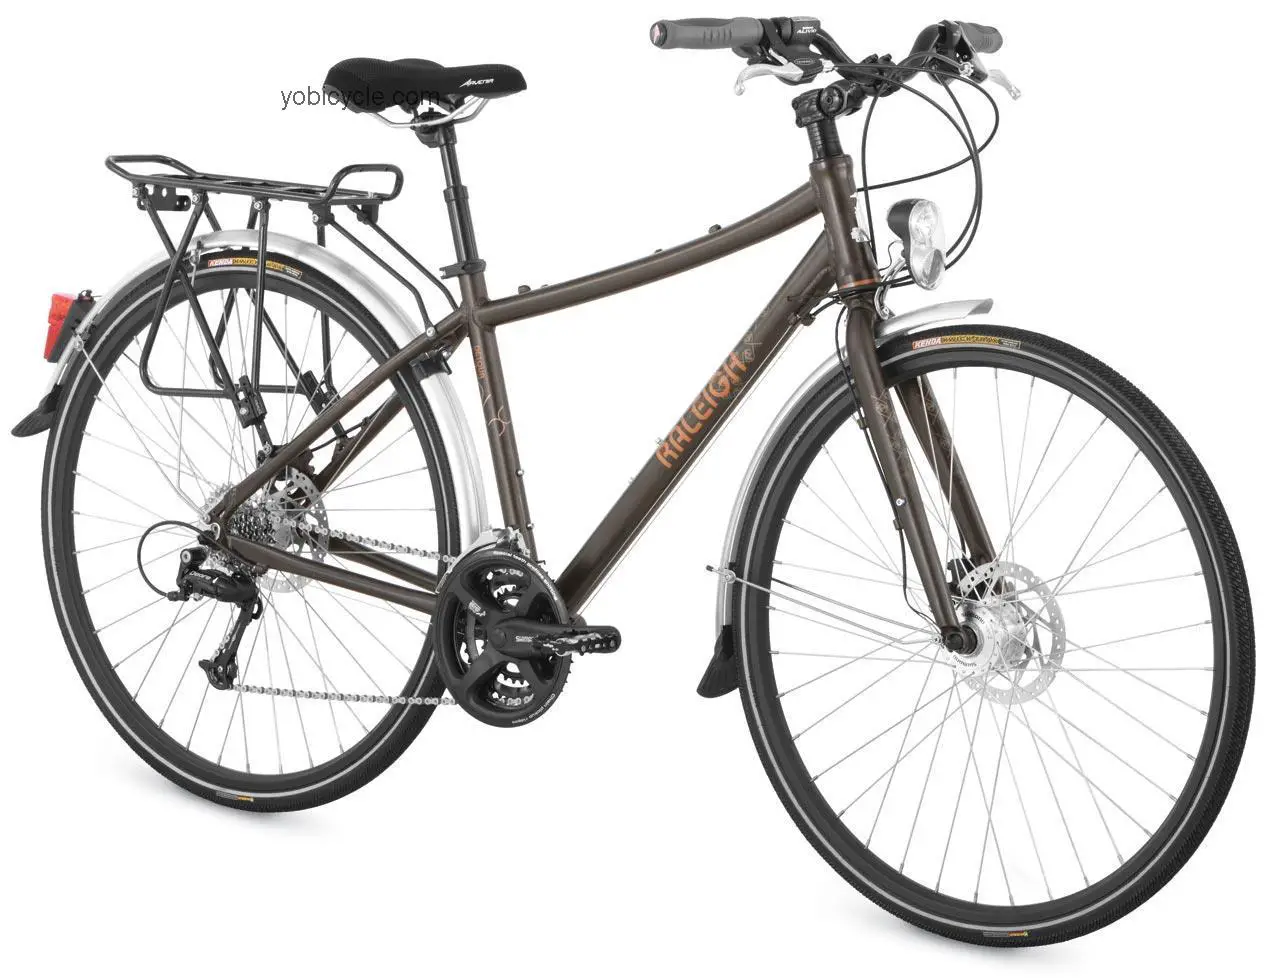 Raleigh Detour Deluxe 2009 comparison online with competitors